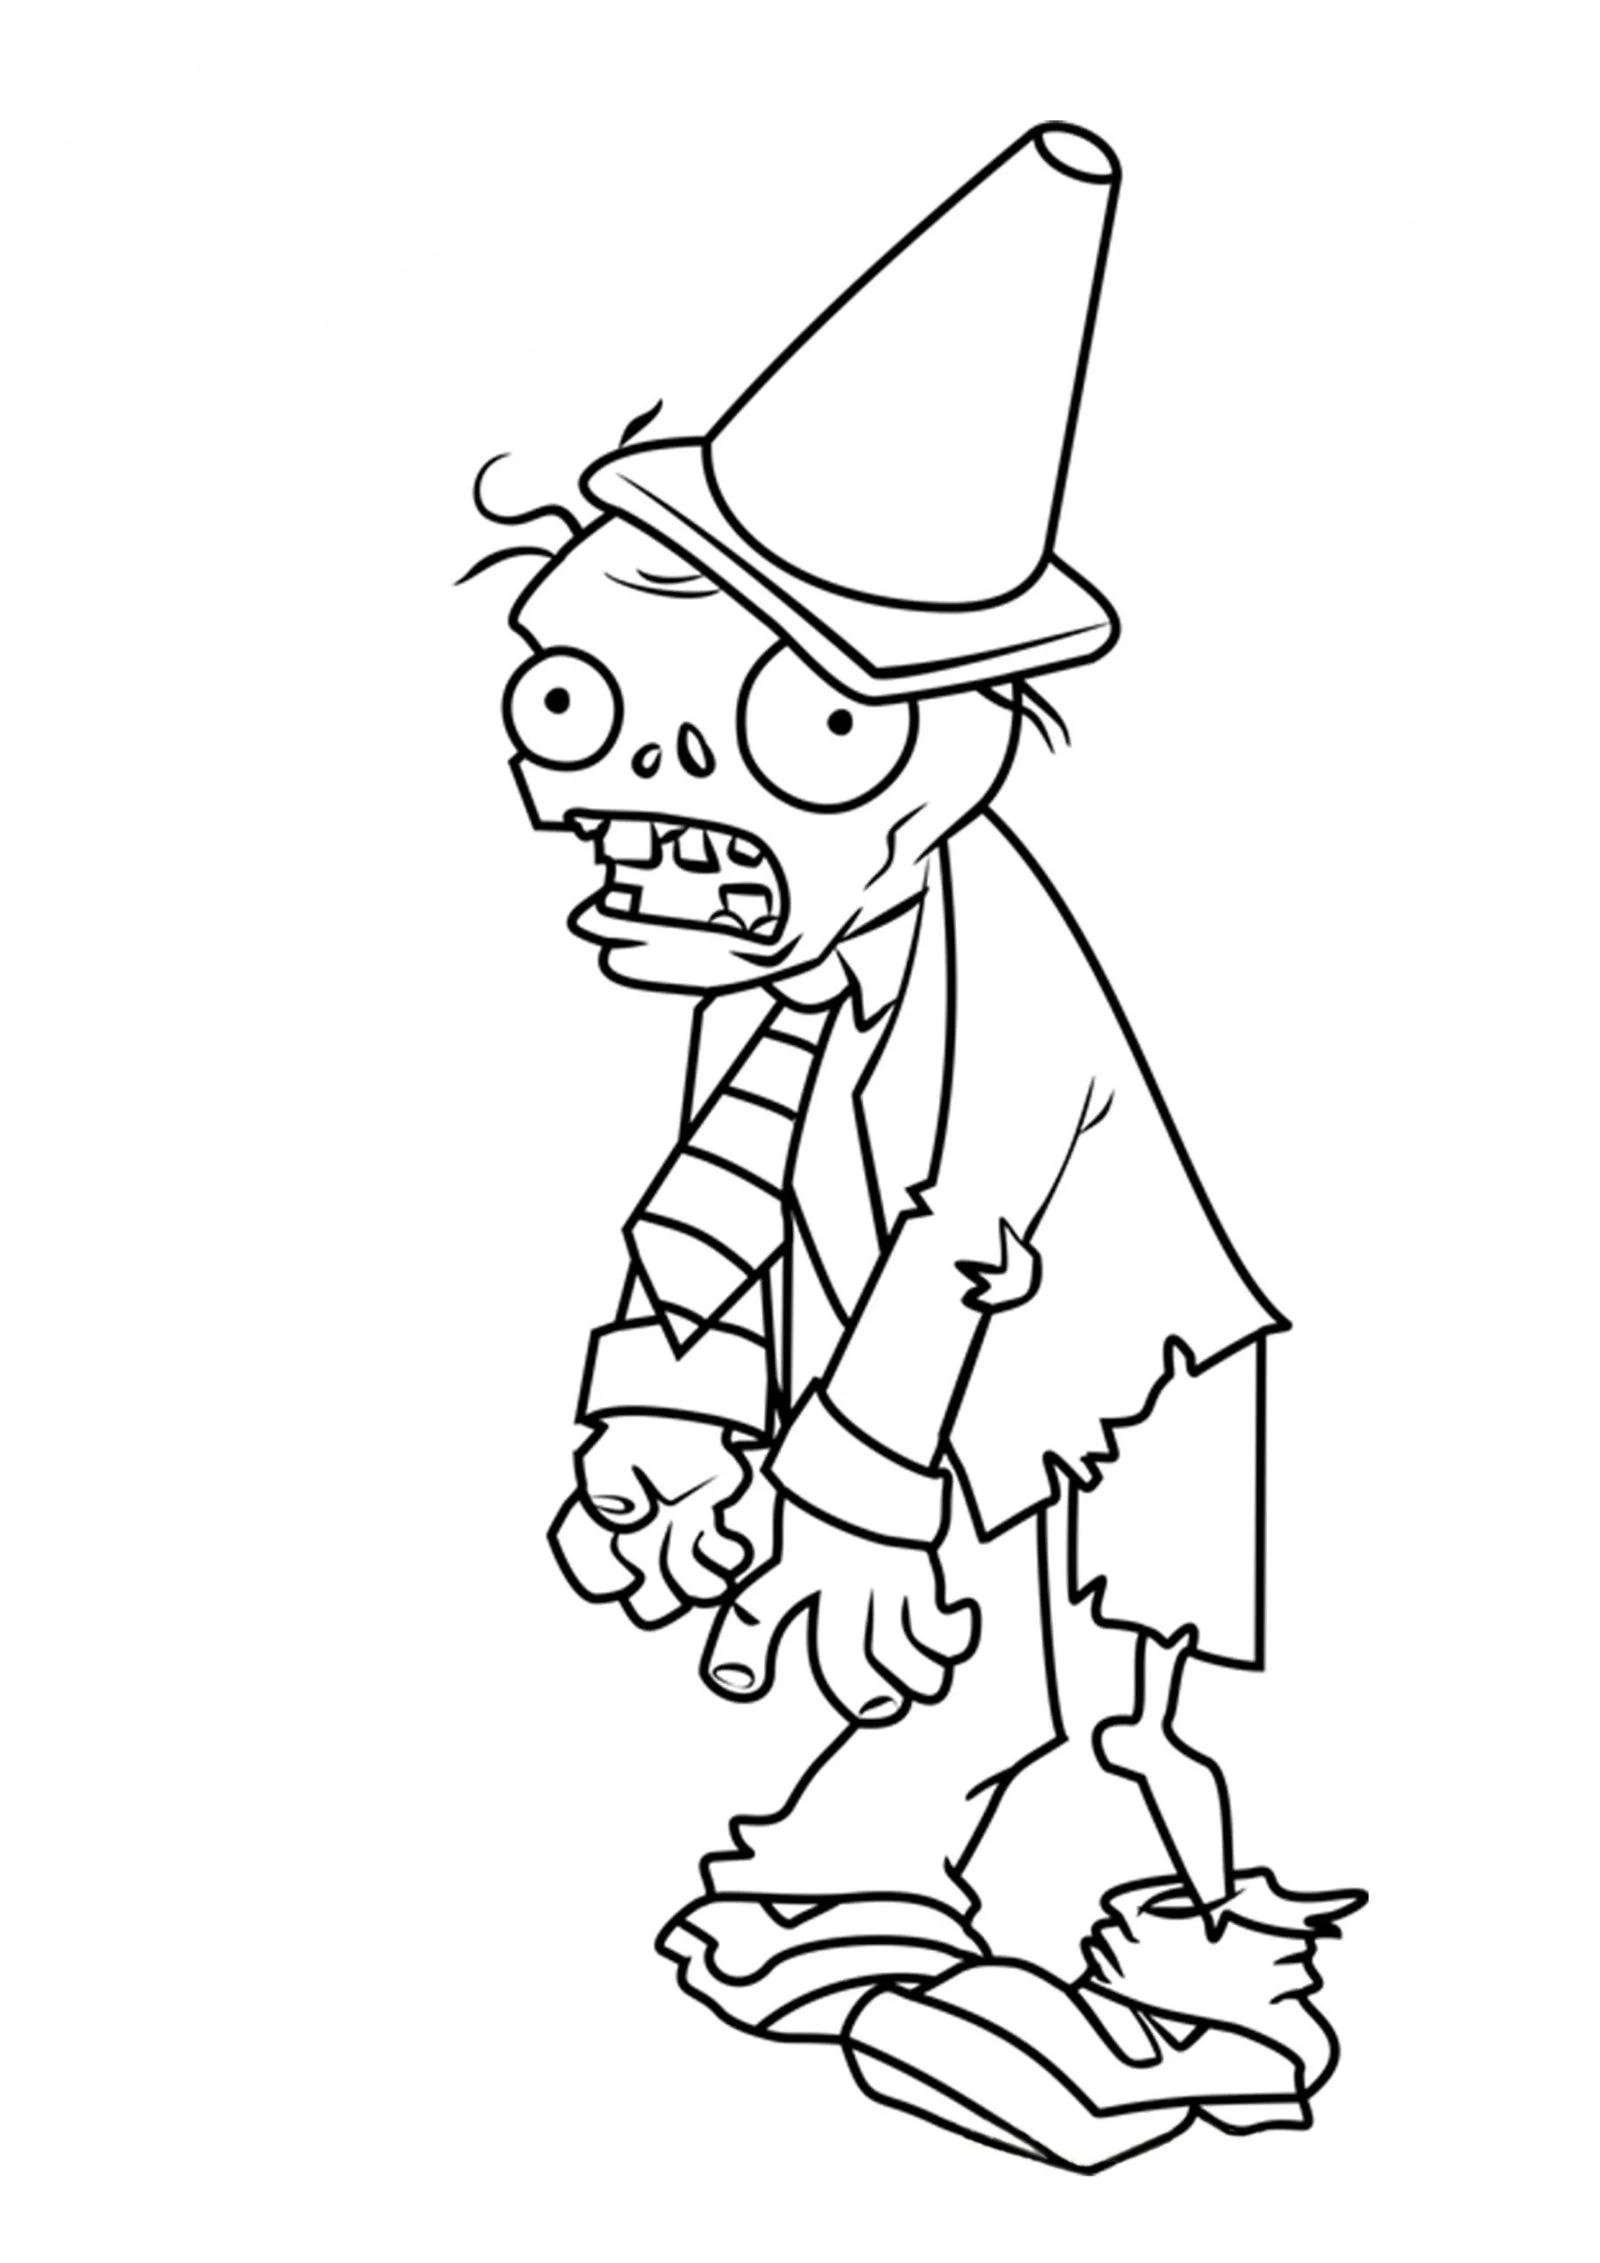 Plants vs Zombies Coloring Pages